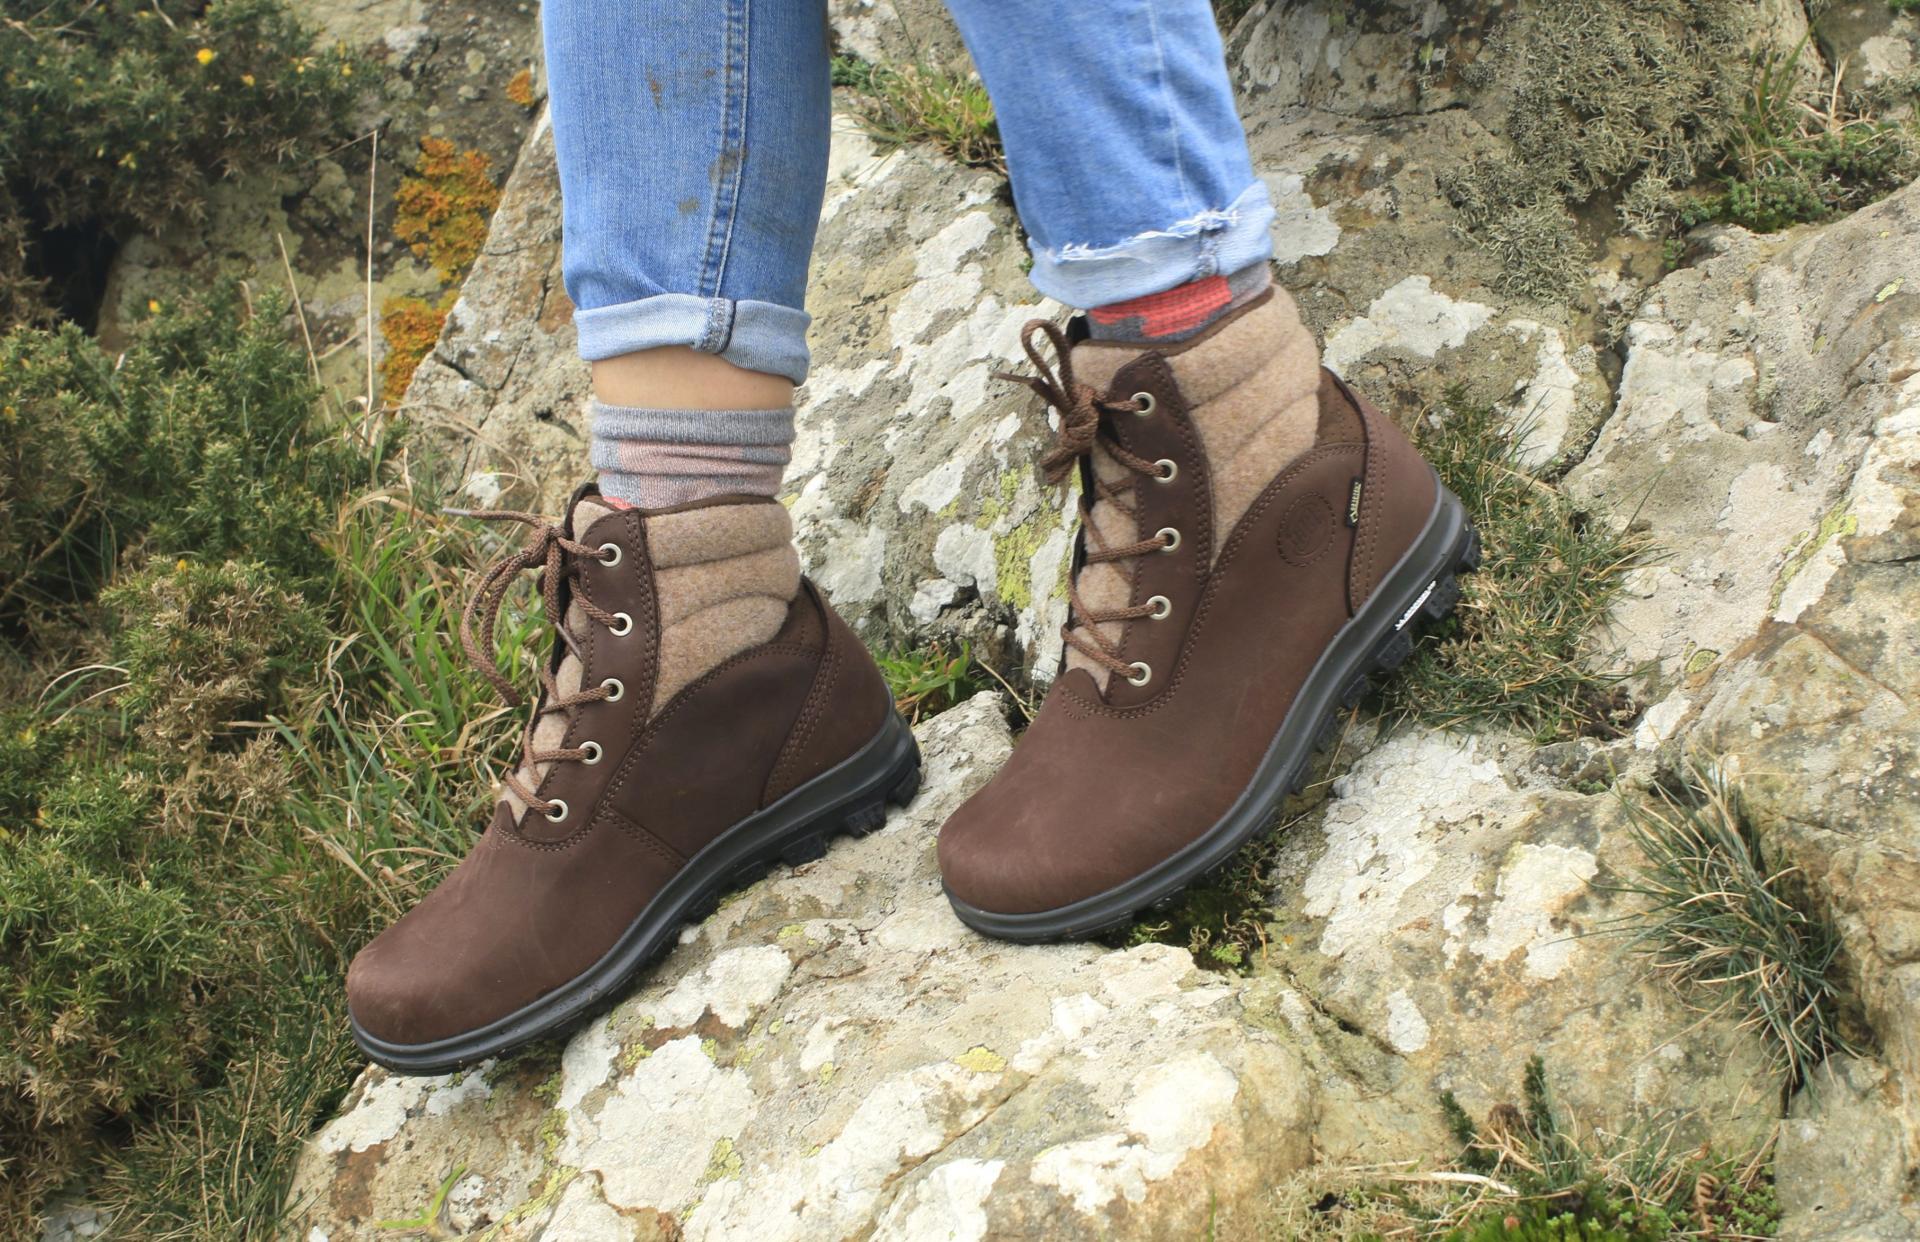 Review Hanwag Aotea boots